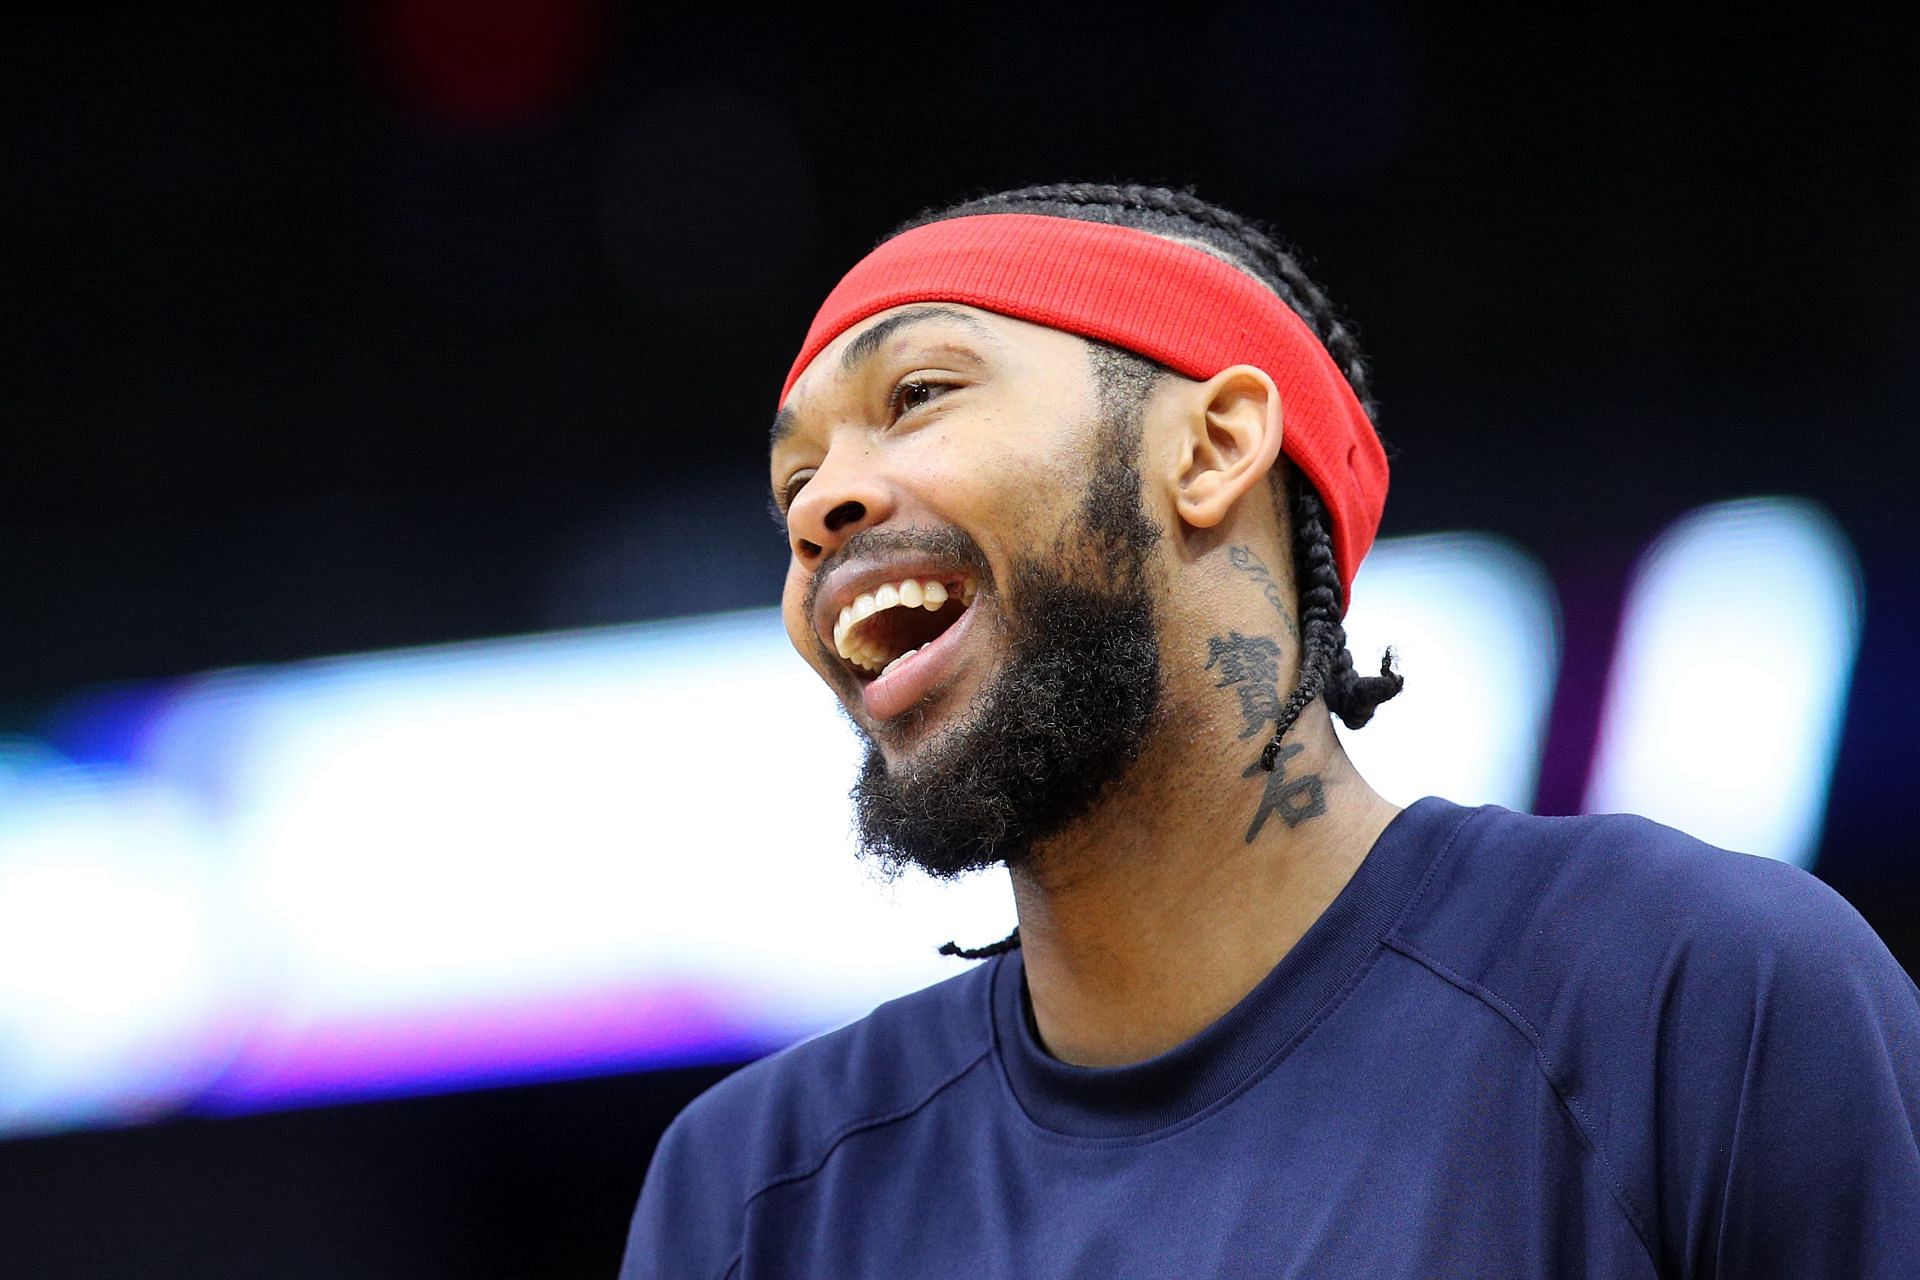 Brandon Ingram #14 of the New Orleans Pelicans stands on the court prior to the start of a NBA game against the Sacramento Kings during the first quarter of a NBA game at Smoothie King Center on October 29, 2021 in New Orleans, Louisiana.